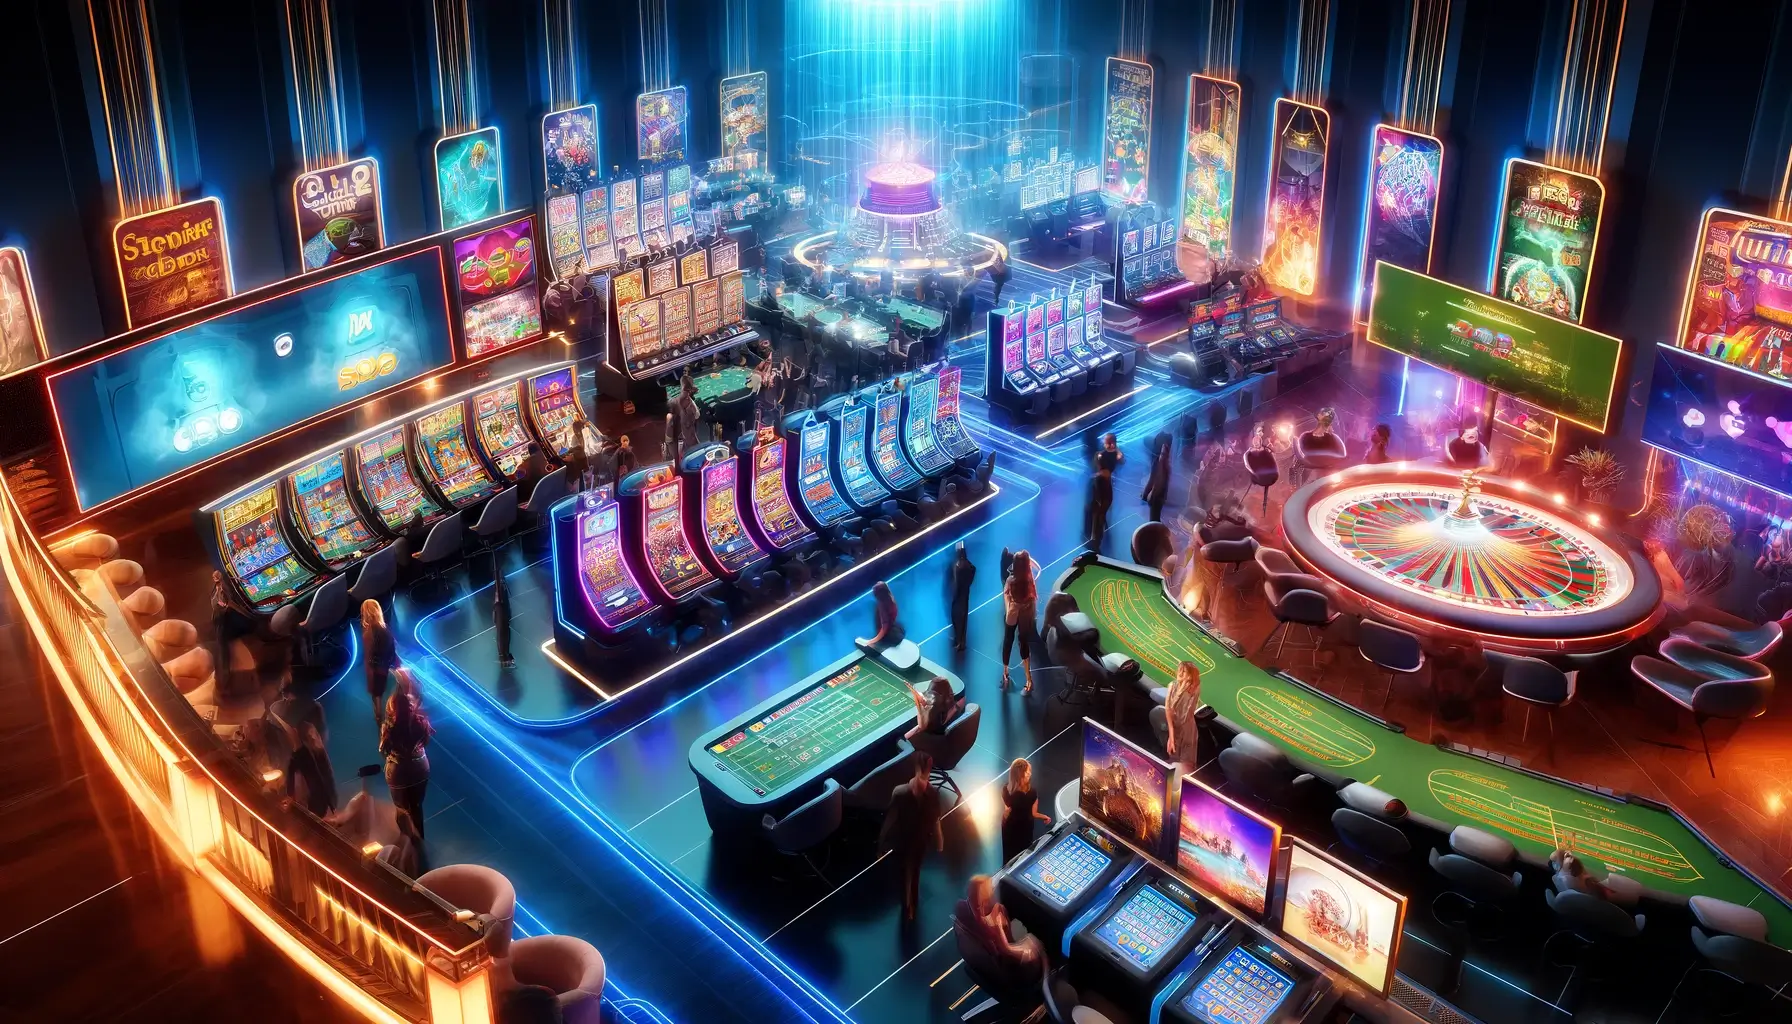 Best online casinos. This image depicts a bustling and vibrant online casino setting, featuring a variety of games like slots, blackjack, roulette, and live dealer games. The scene is filled with glowing screens and colorful digital displays, emphasizing the modern and high-tech nature of online gambling.